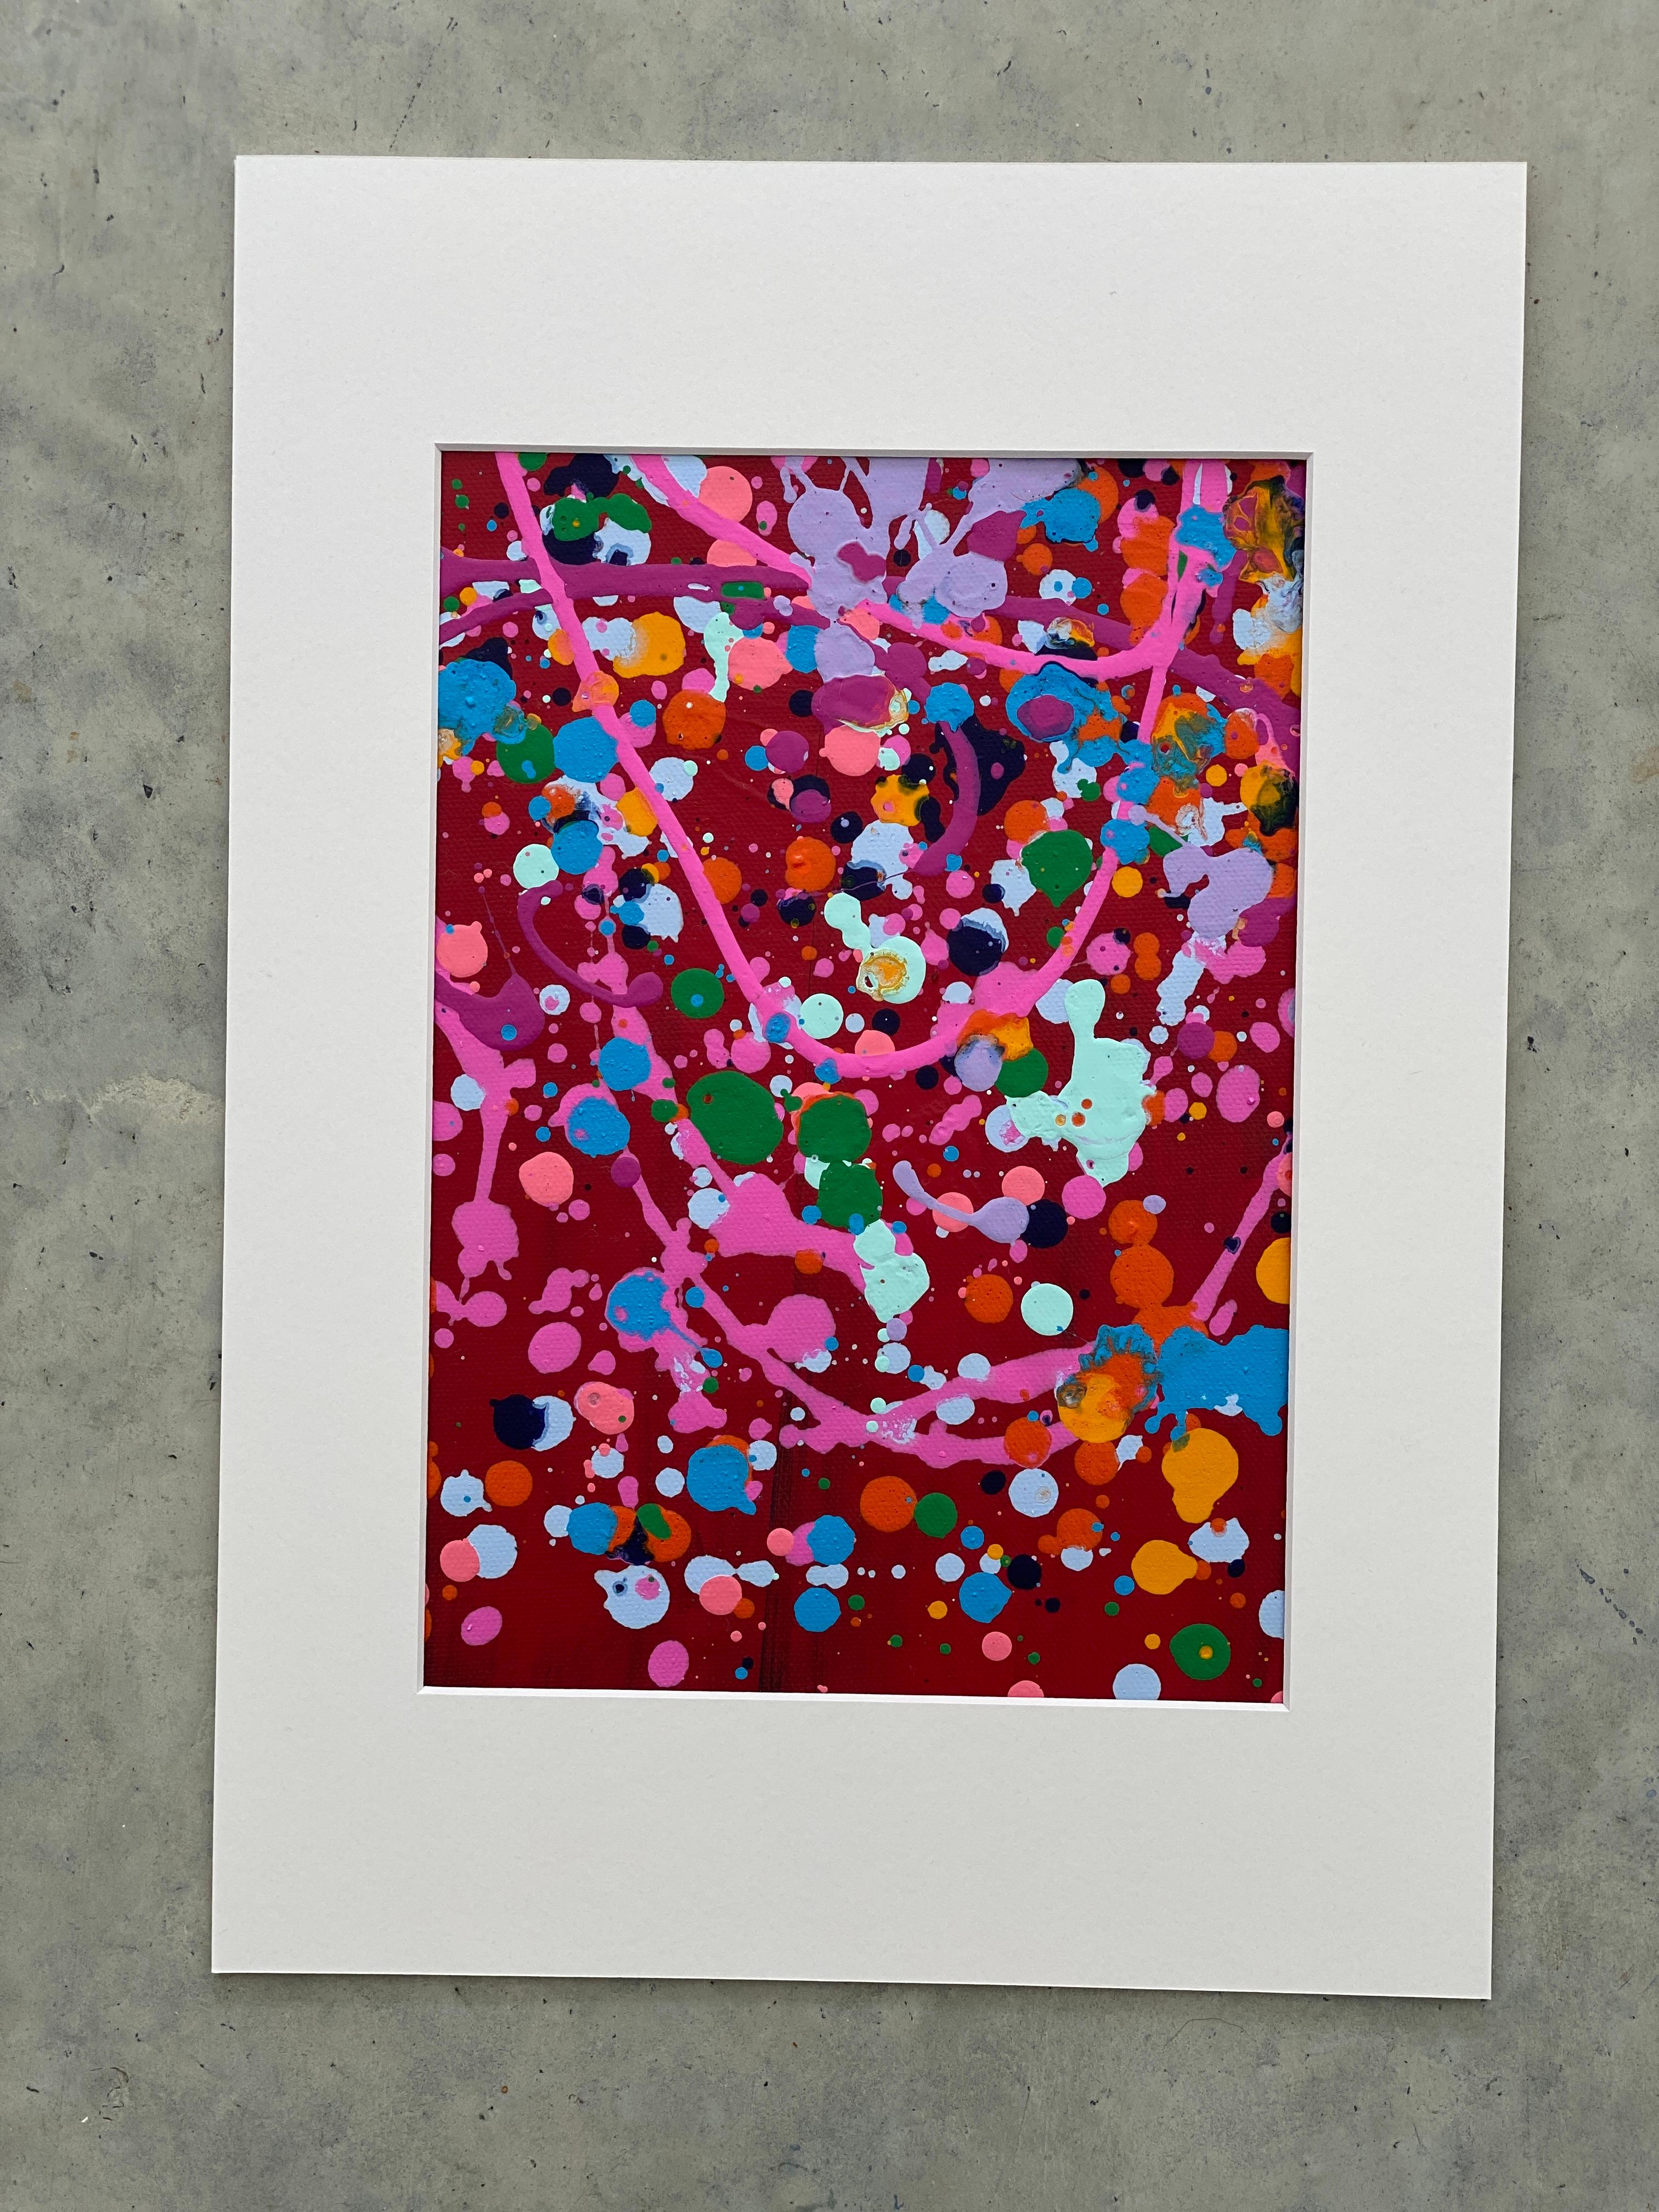 Colorful spatter no8 drip abstract expressionist Jackson Pollock red pink green - Painting by Kathleen Rhee